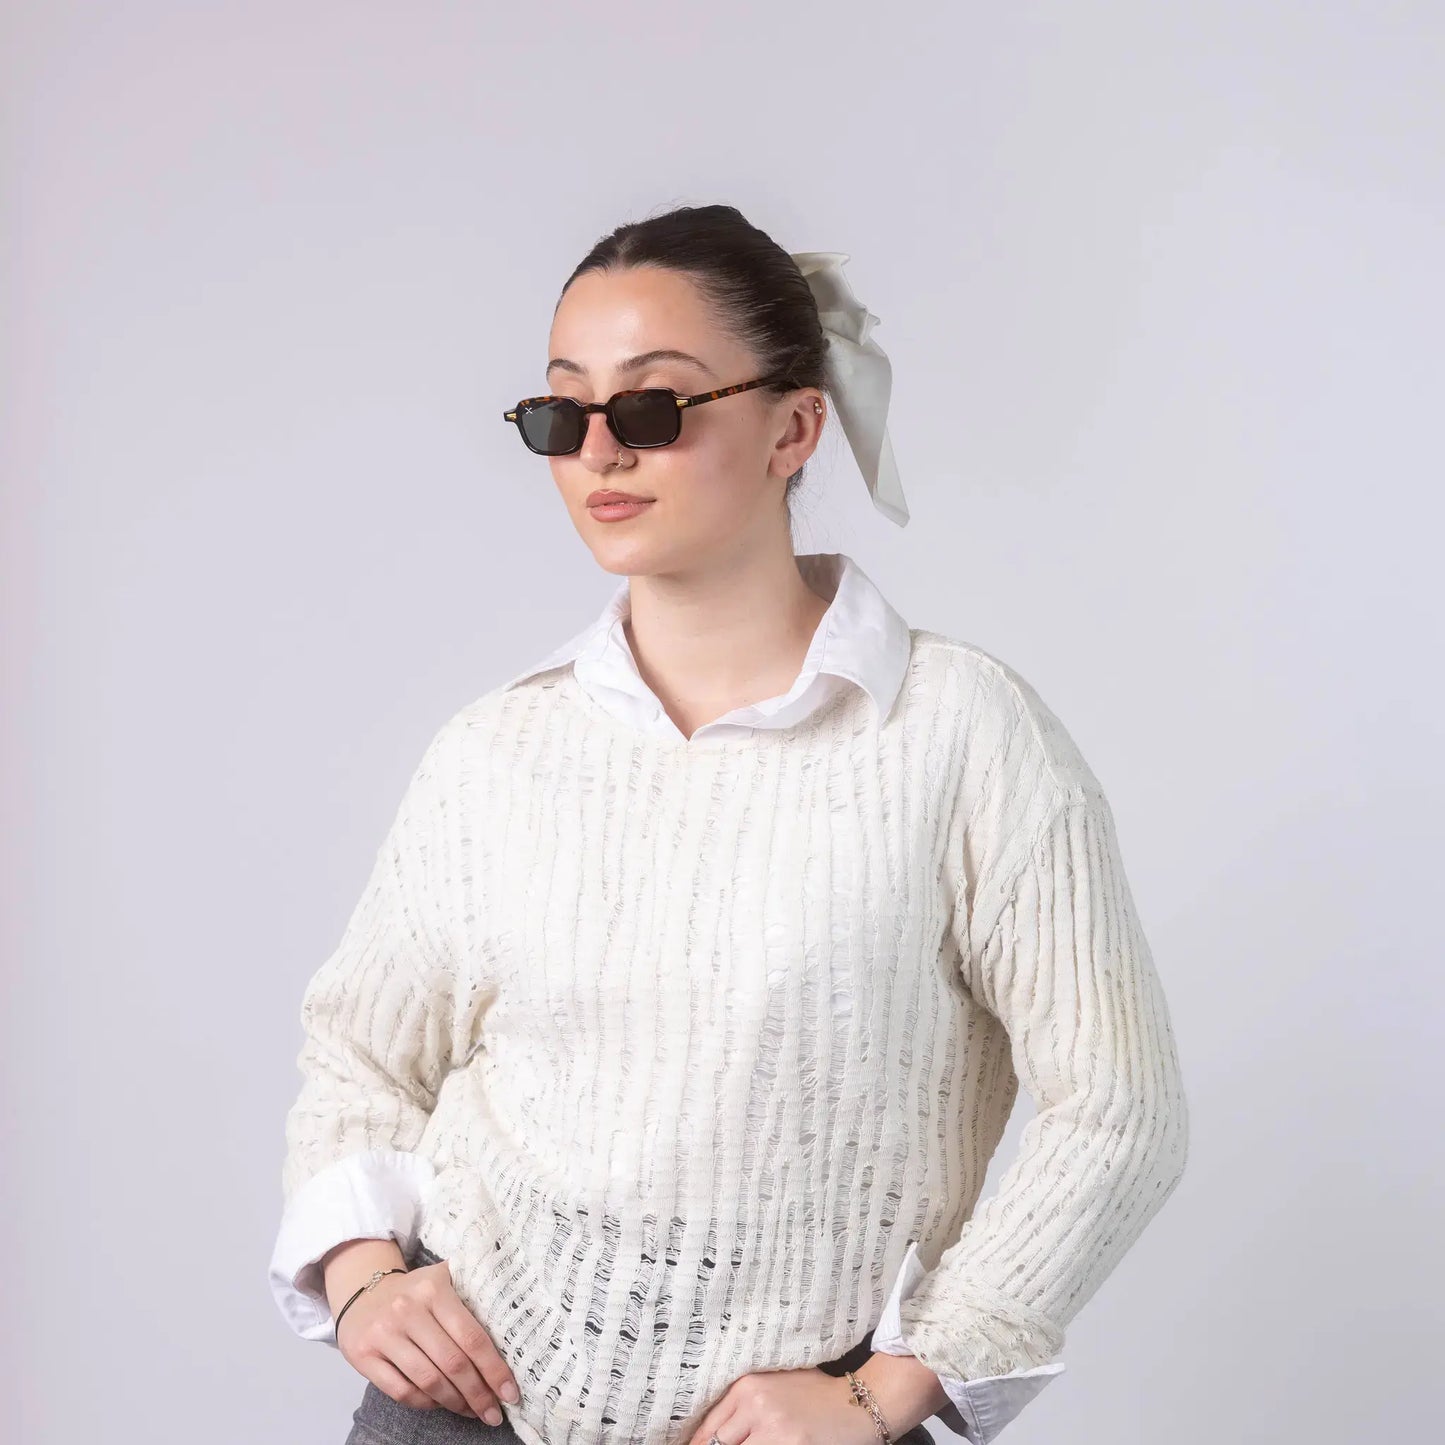 A female model wearing Exposure Sunglasses polarized sunglasses with brown frames and green lenses, posing against a white background.